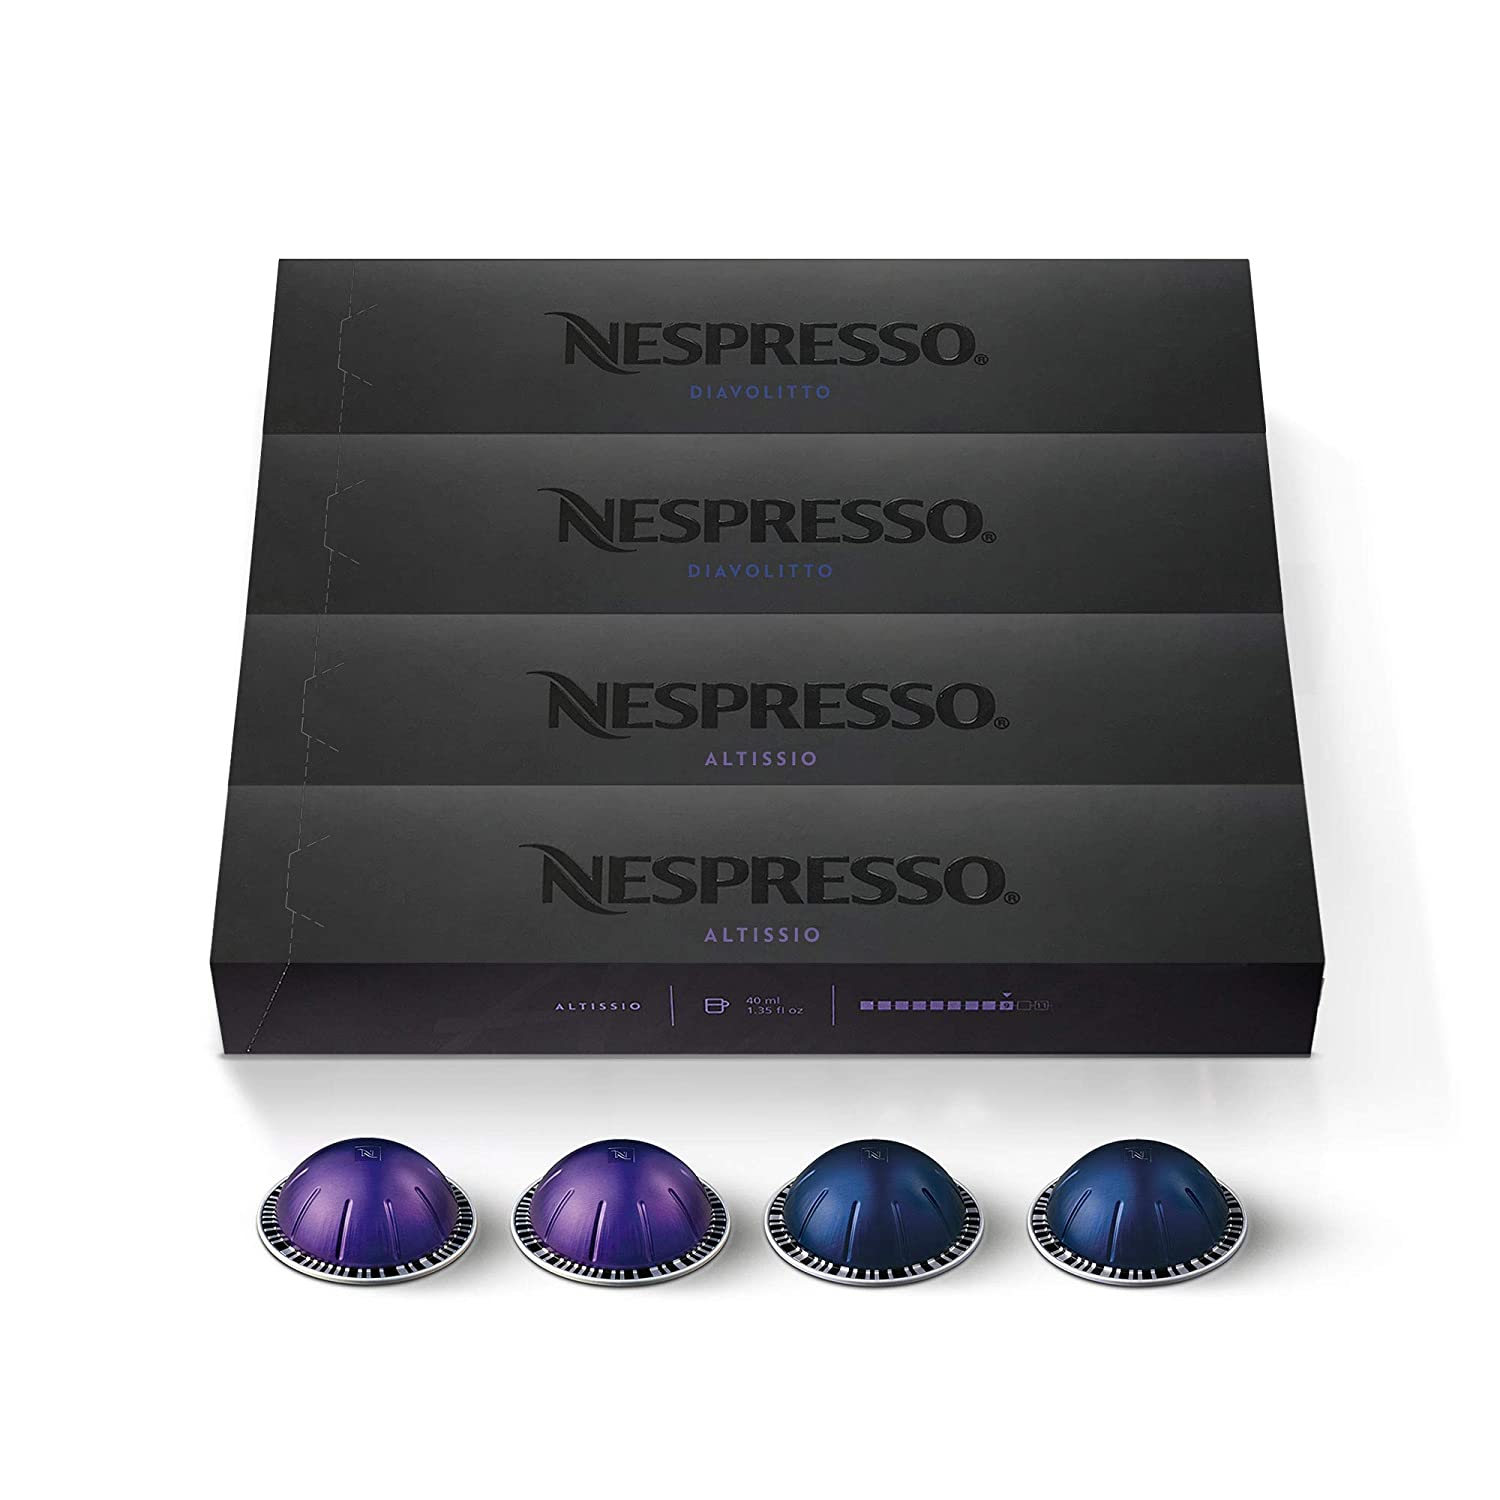 40 Count Nespresso VertuoLine Capsules - Espresso, Bold Variety Pack, Medium and Dark Roast - Brews 1.35 Fl Oz - As low as $28.70 with 5 S&S Orders